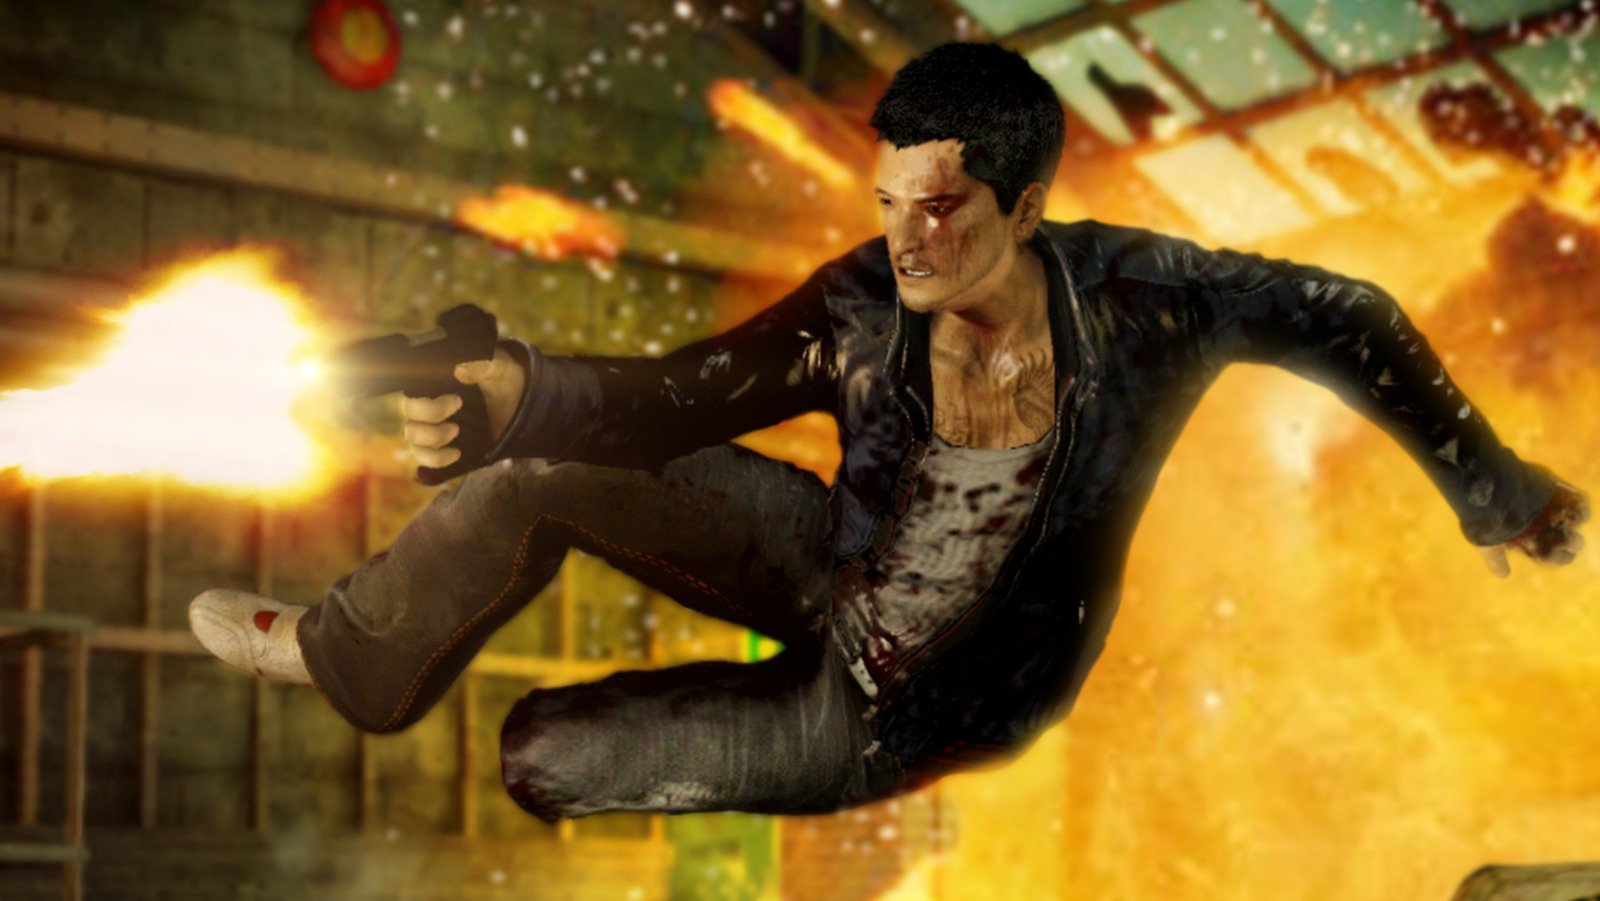 Massively single player experience” planned for cancelled Sleeping Dogs  sequel, crime coordinated via cloud saves